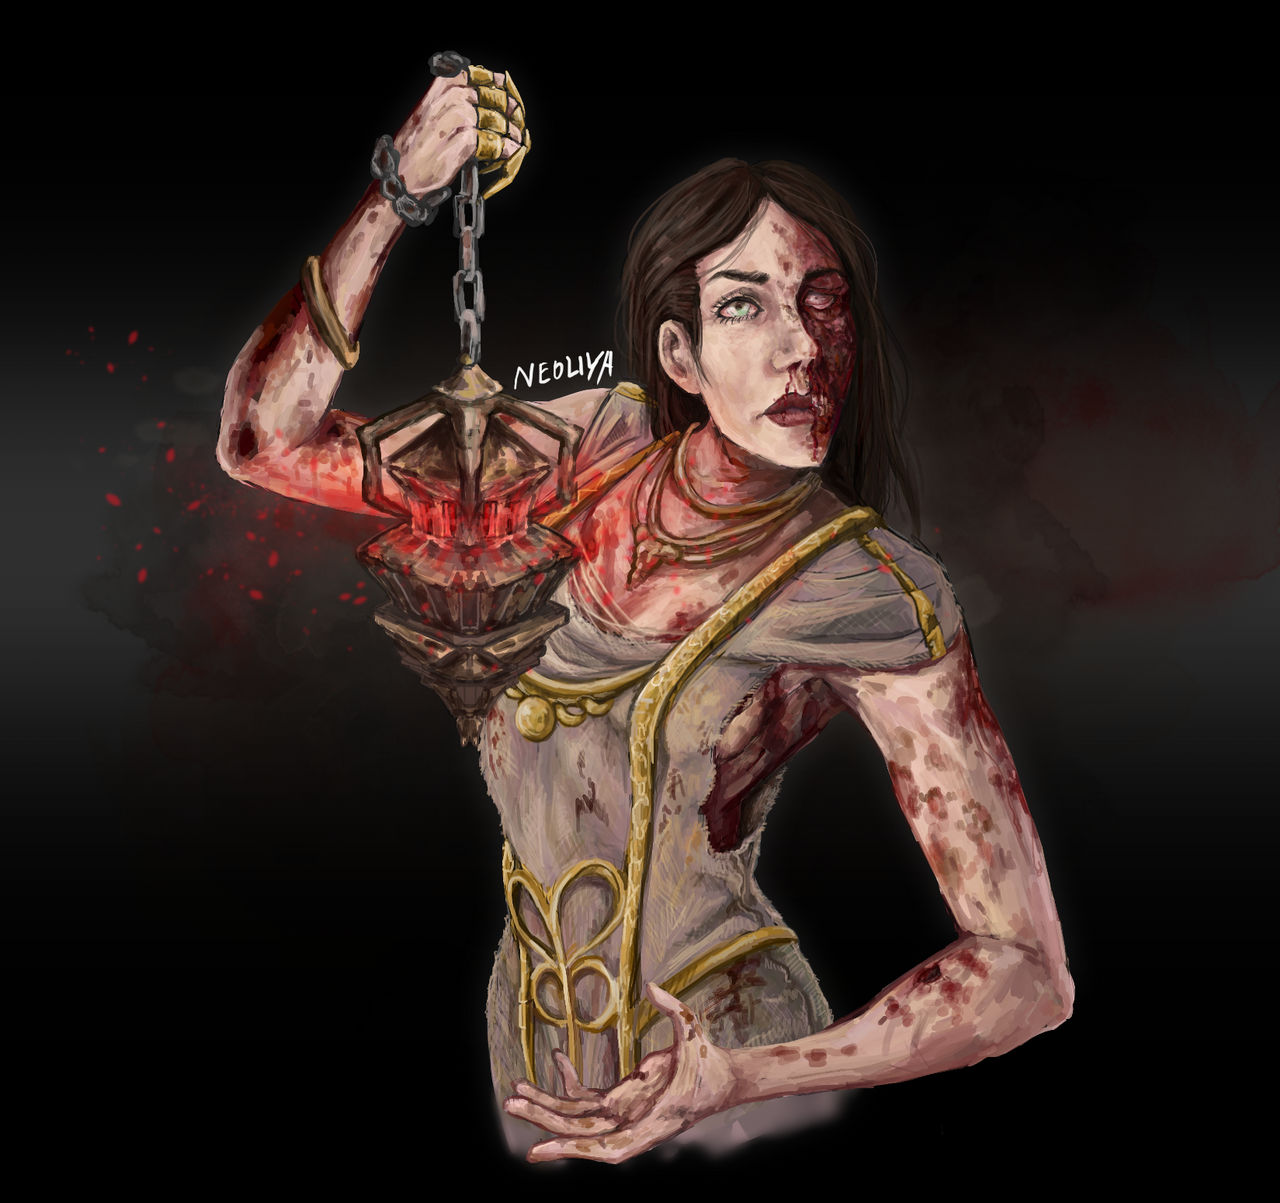 The Plague Dbd Without Mask By Puzzledingalaxy On Deviantart